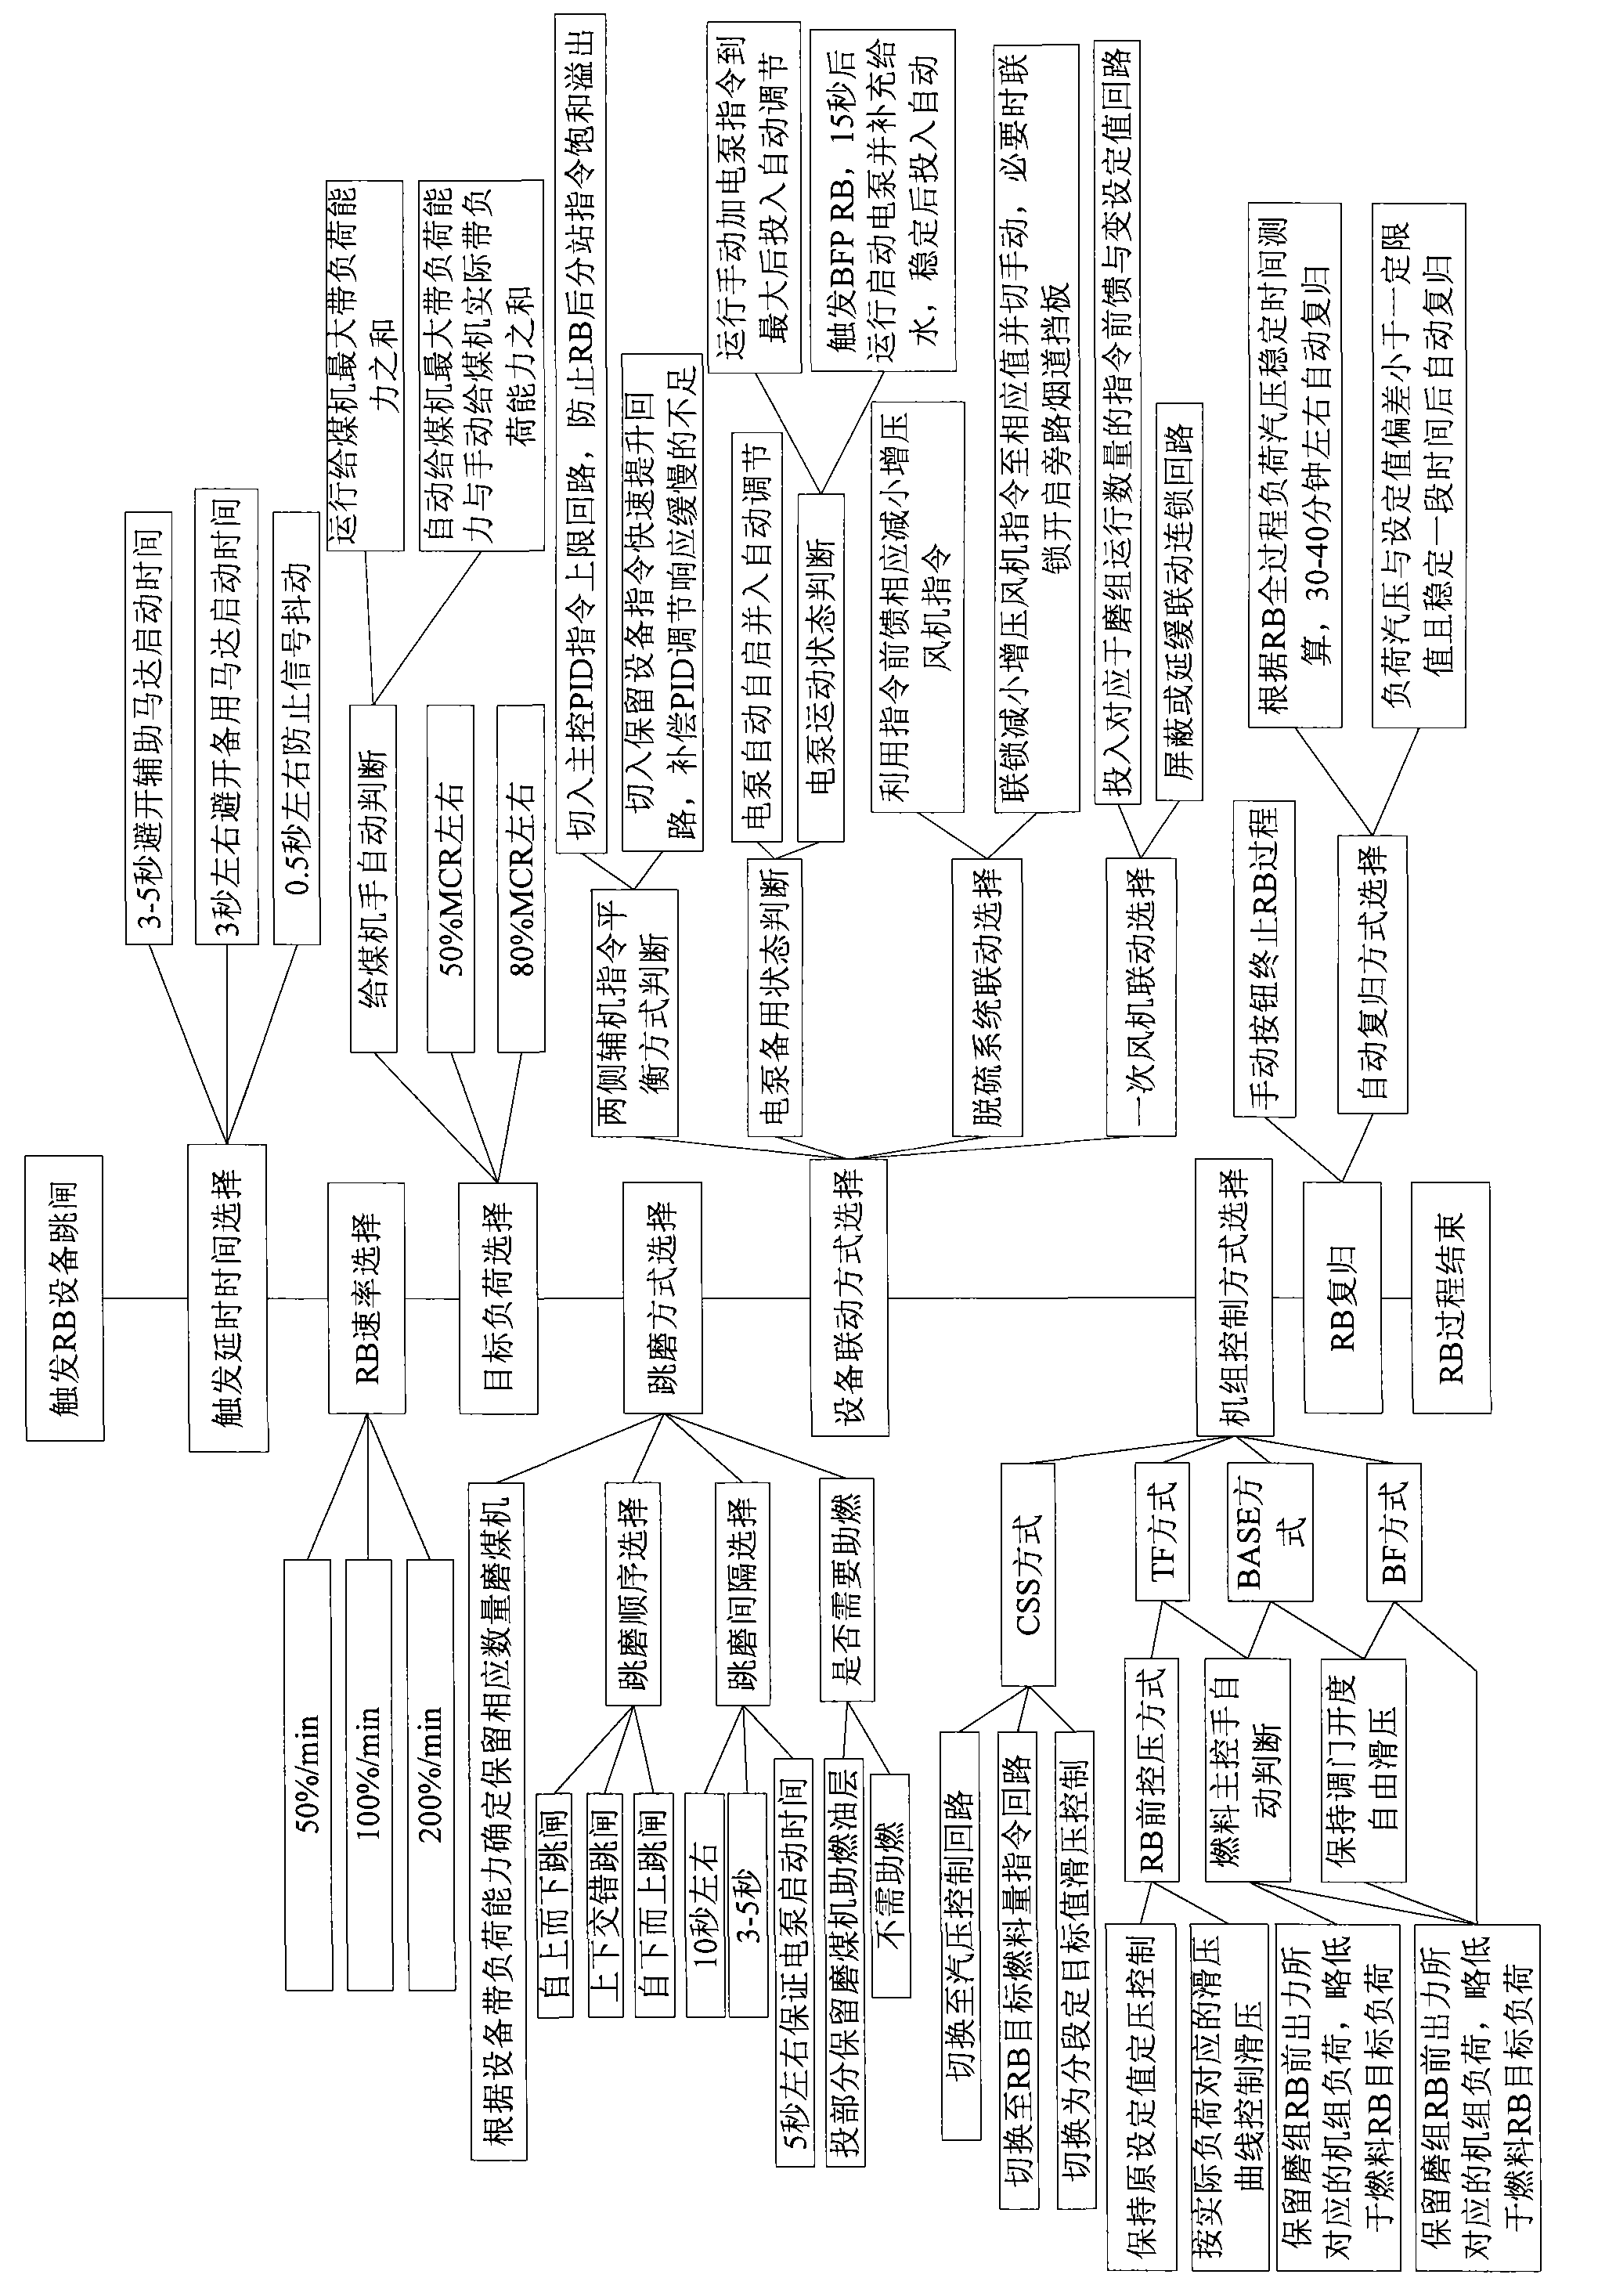 All-working-condition automatic RB control method